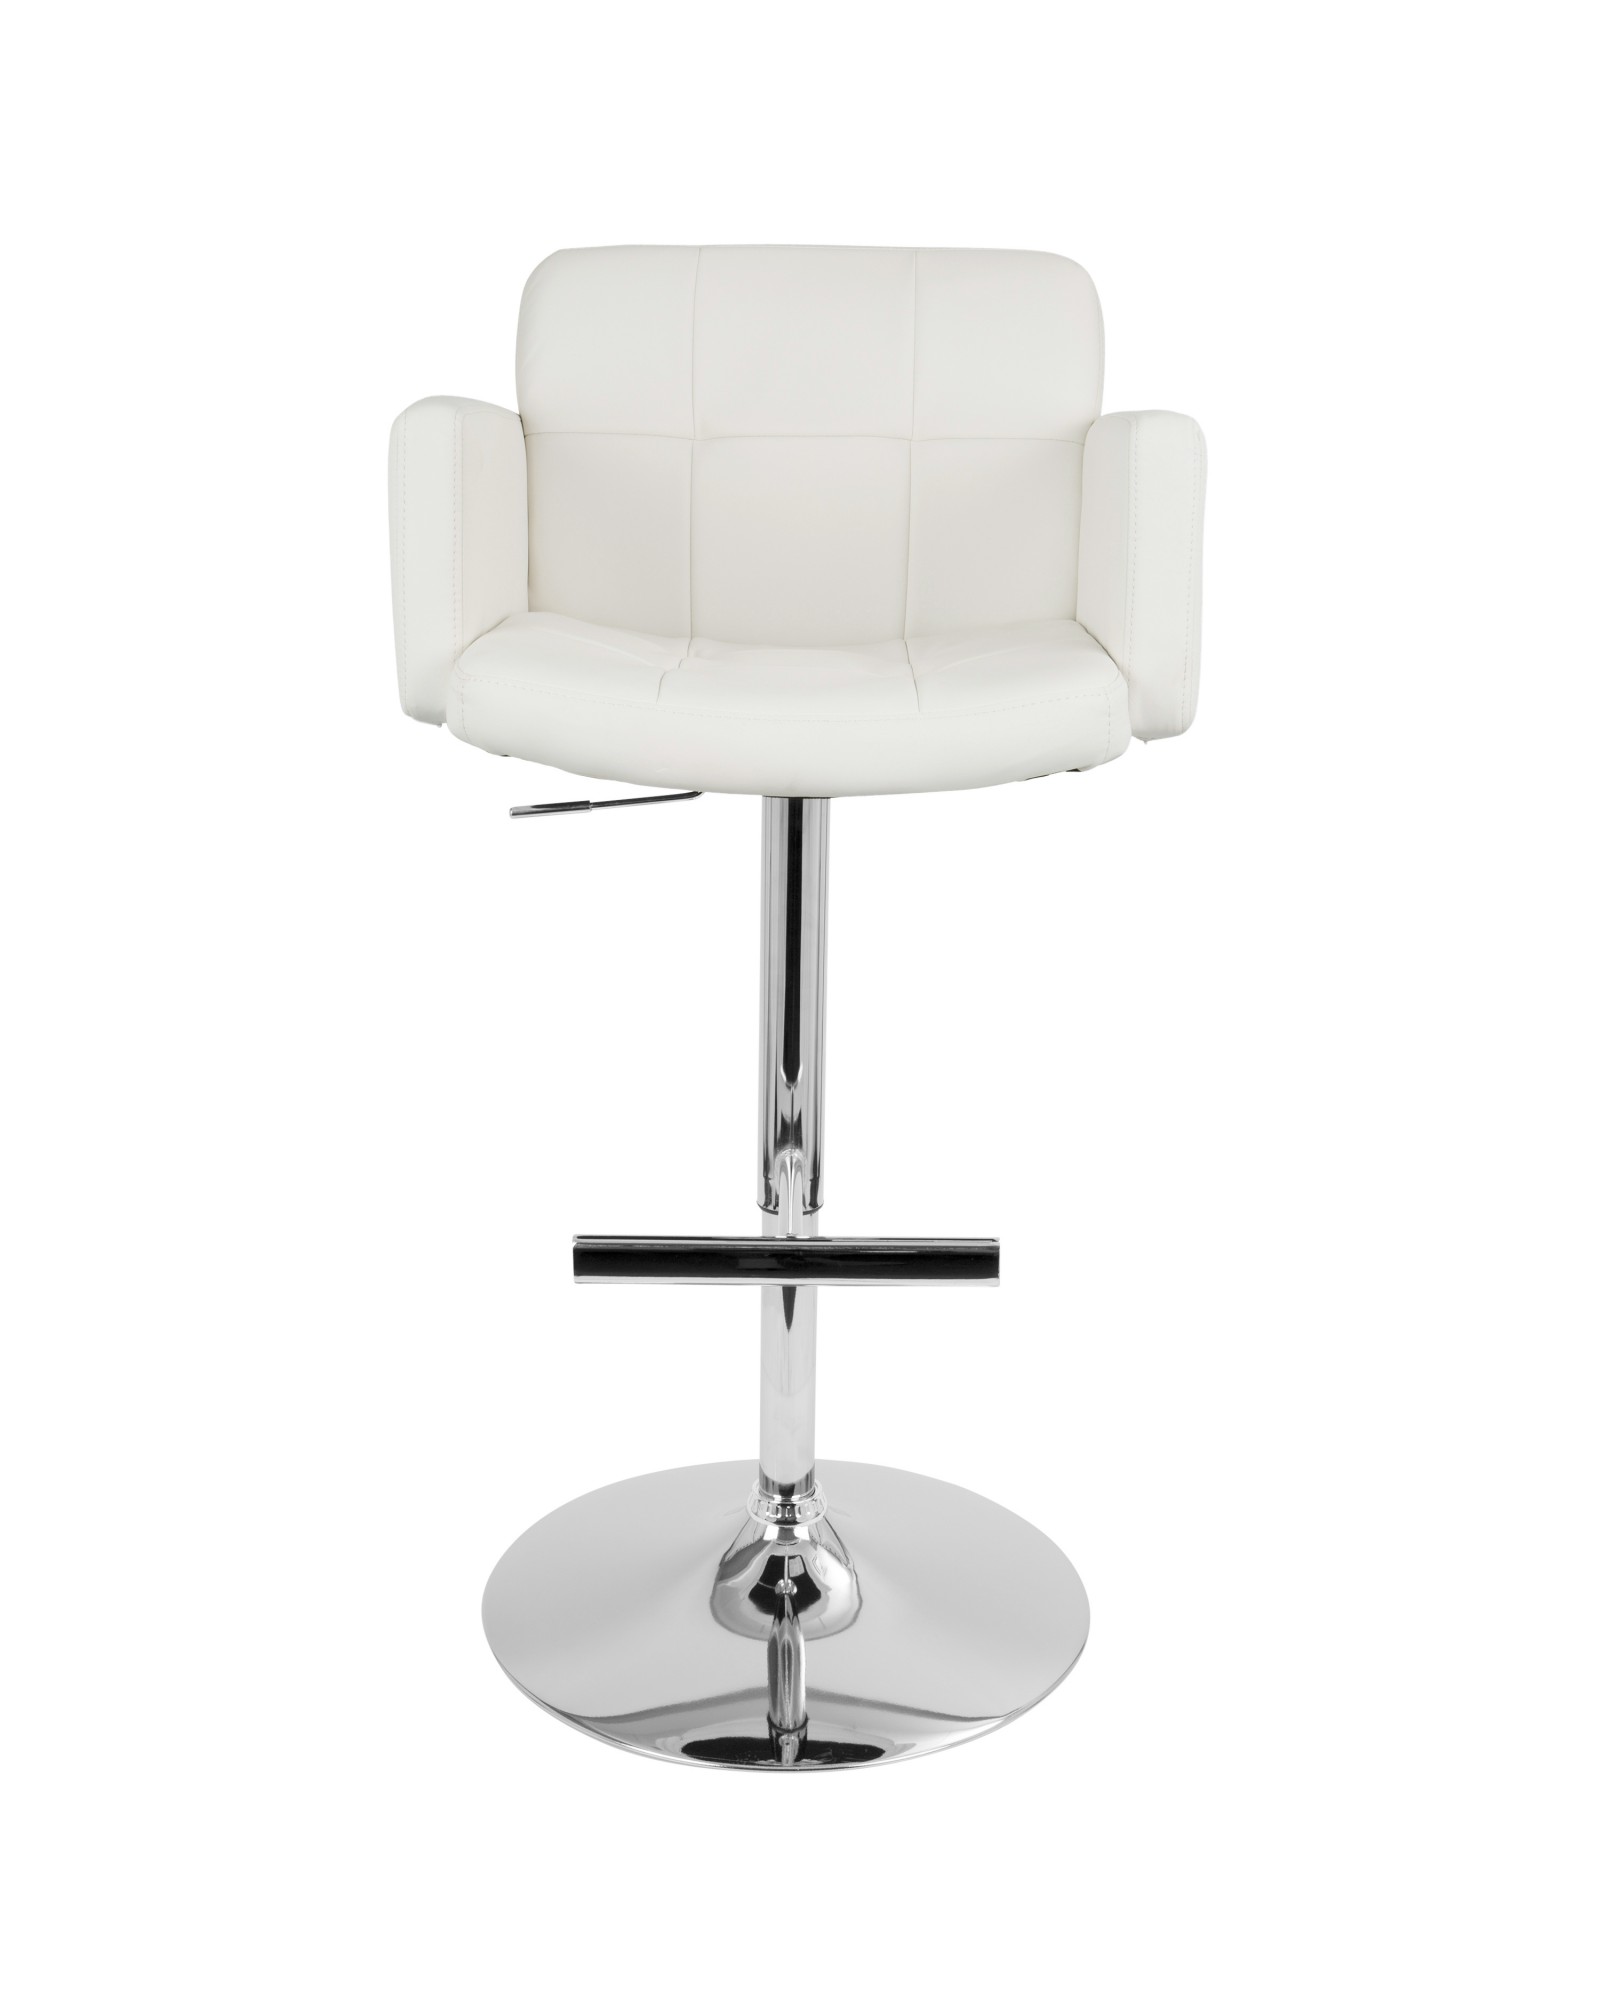 Stout Contemporary Adjustable Barstool with Swivel and White Faux Leather